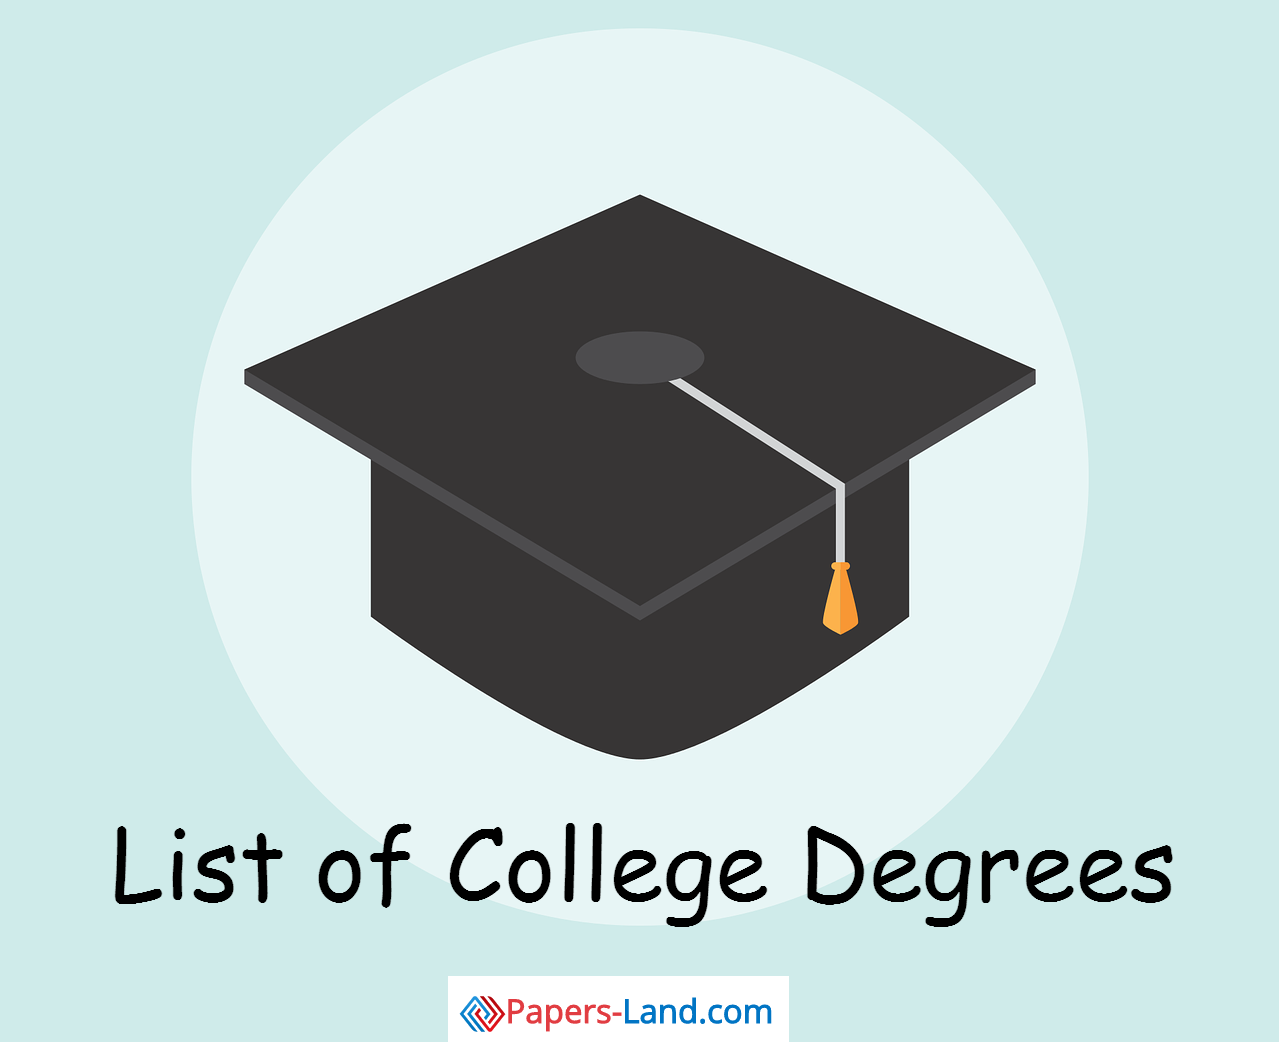 List of College Degrees